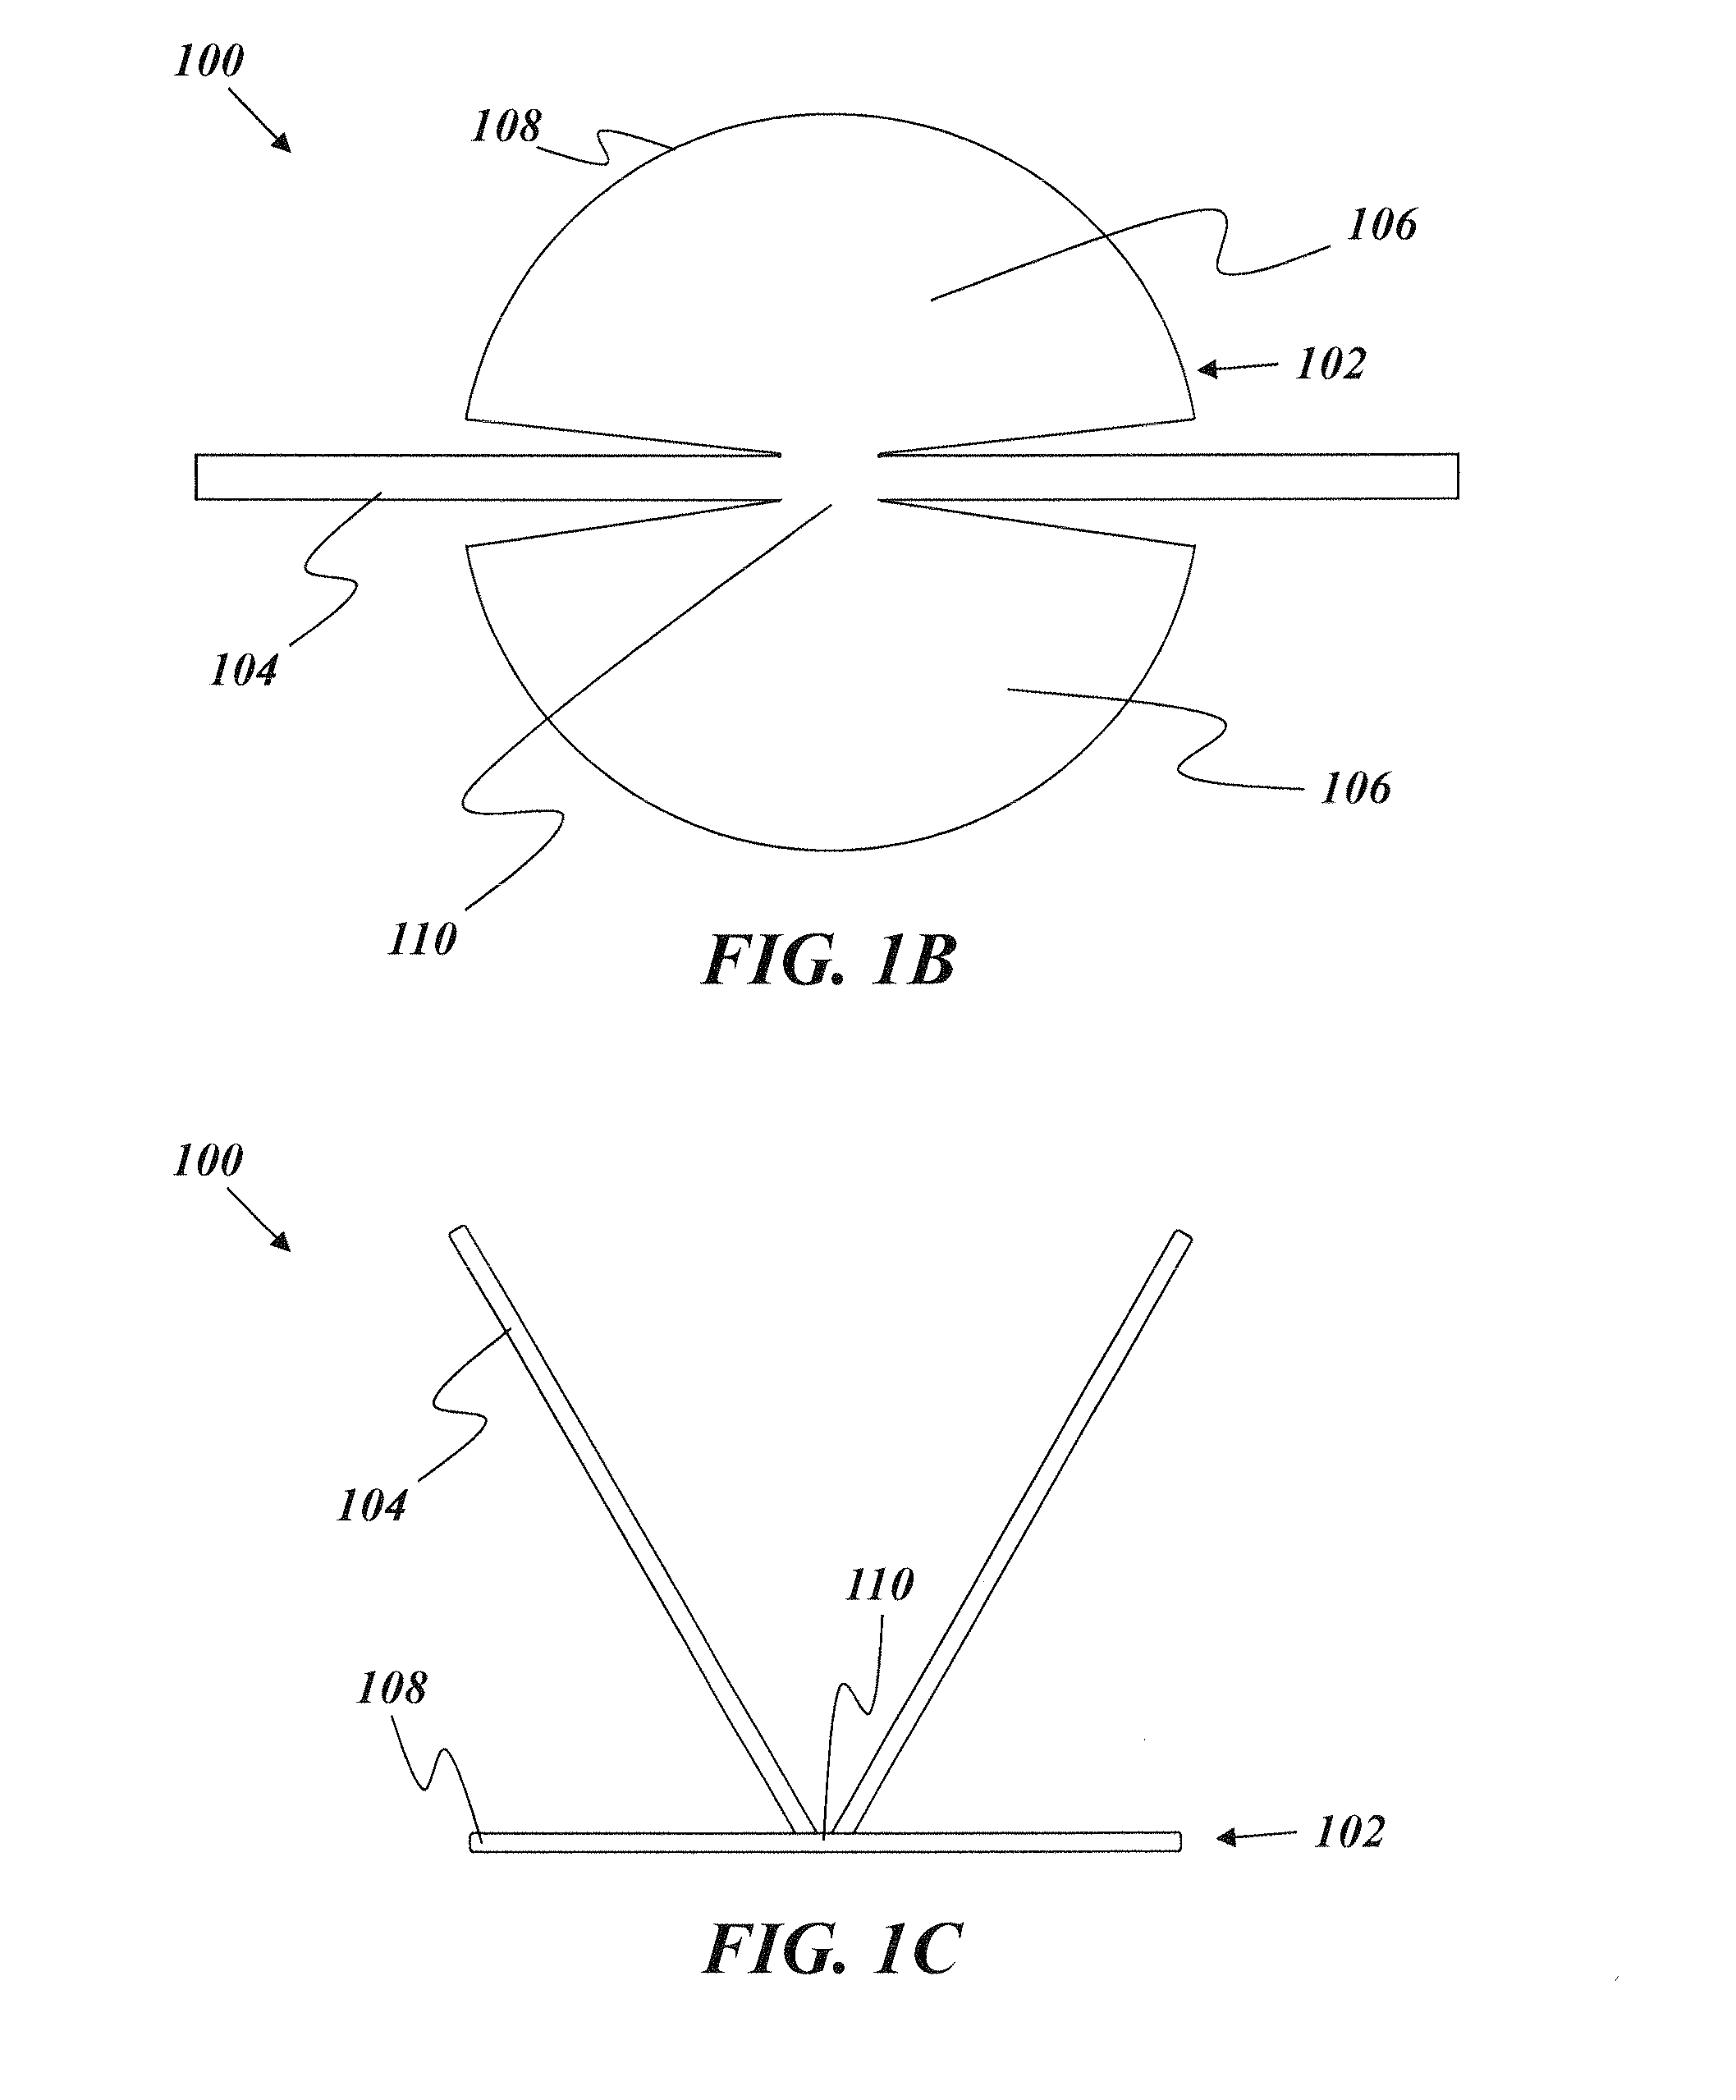 Removable deployment device, system, and method for implantable prostheses